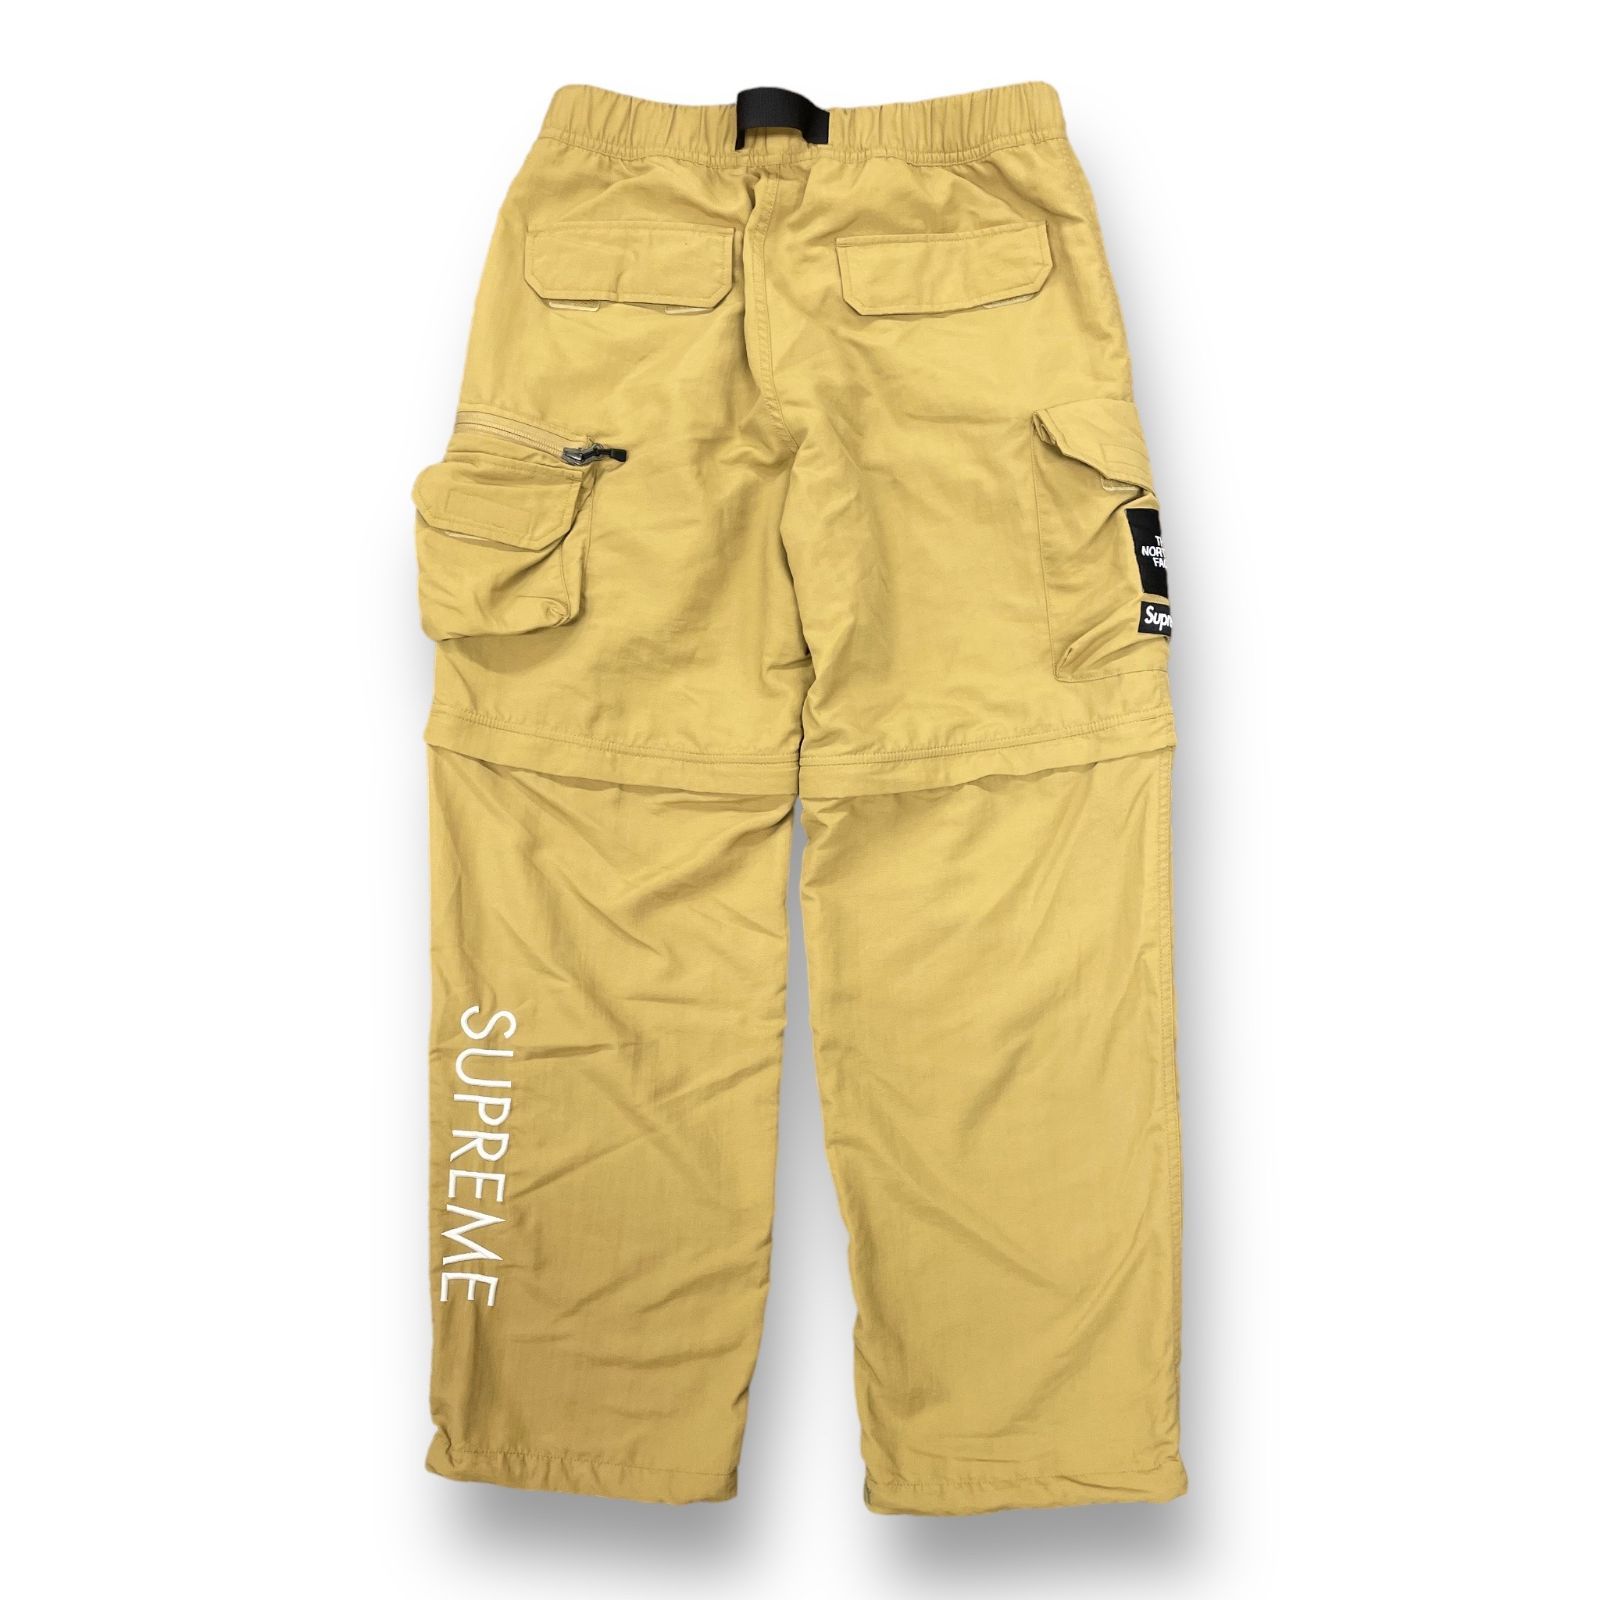 S Supreme The North Face Cargo Pant 国内正規